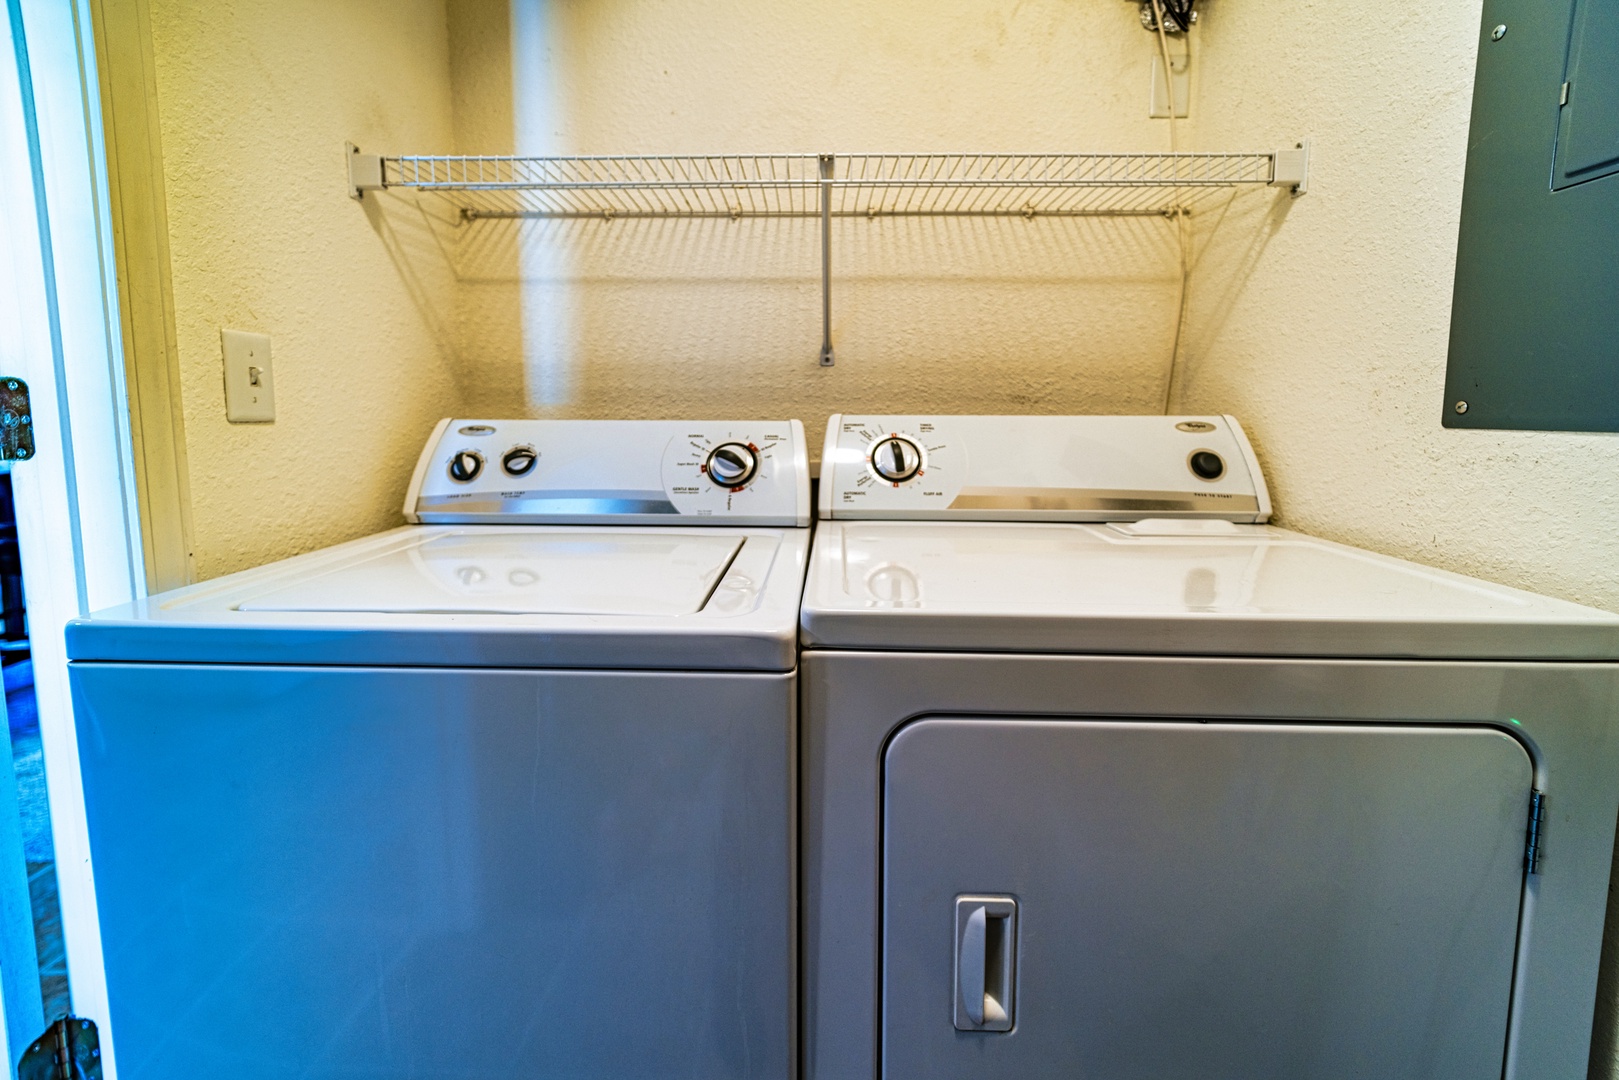 Private laundry facilities are tucked away within the utility closet